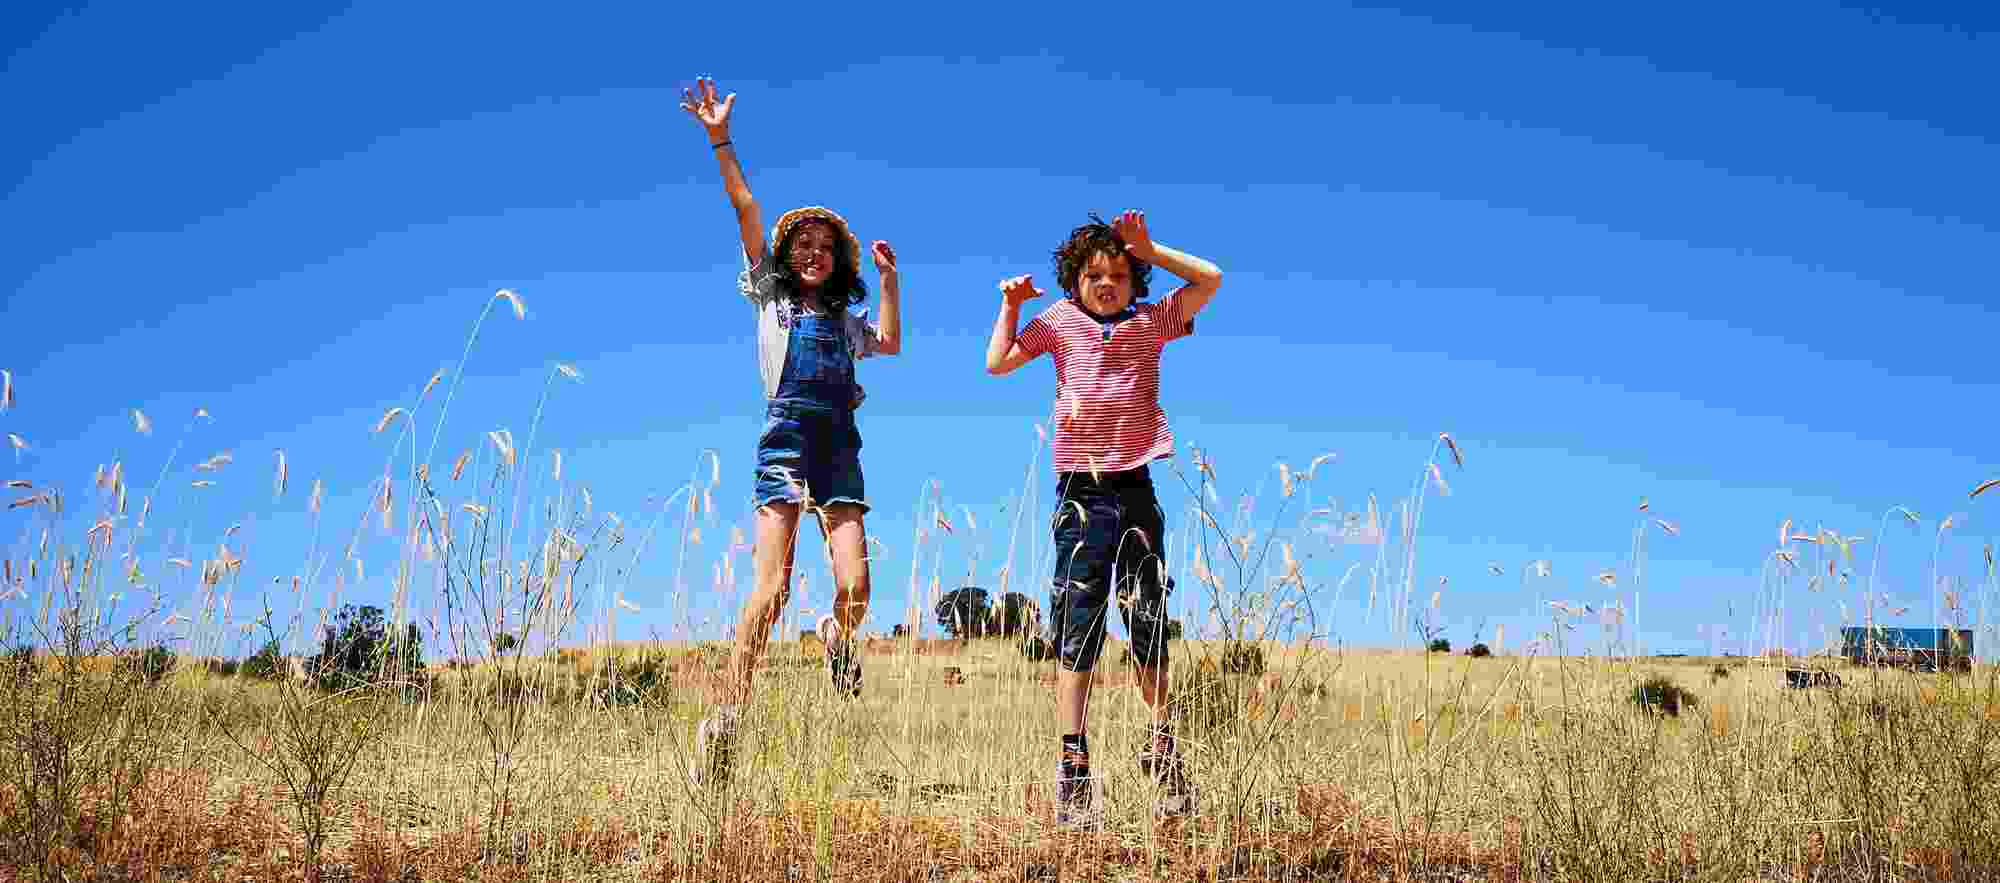 Happy children jumping up